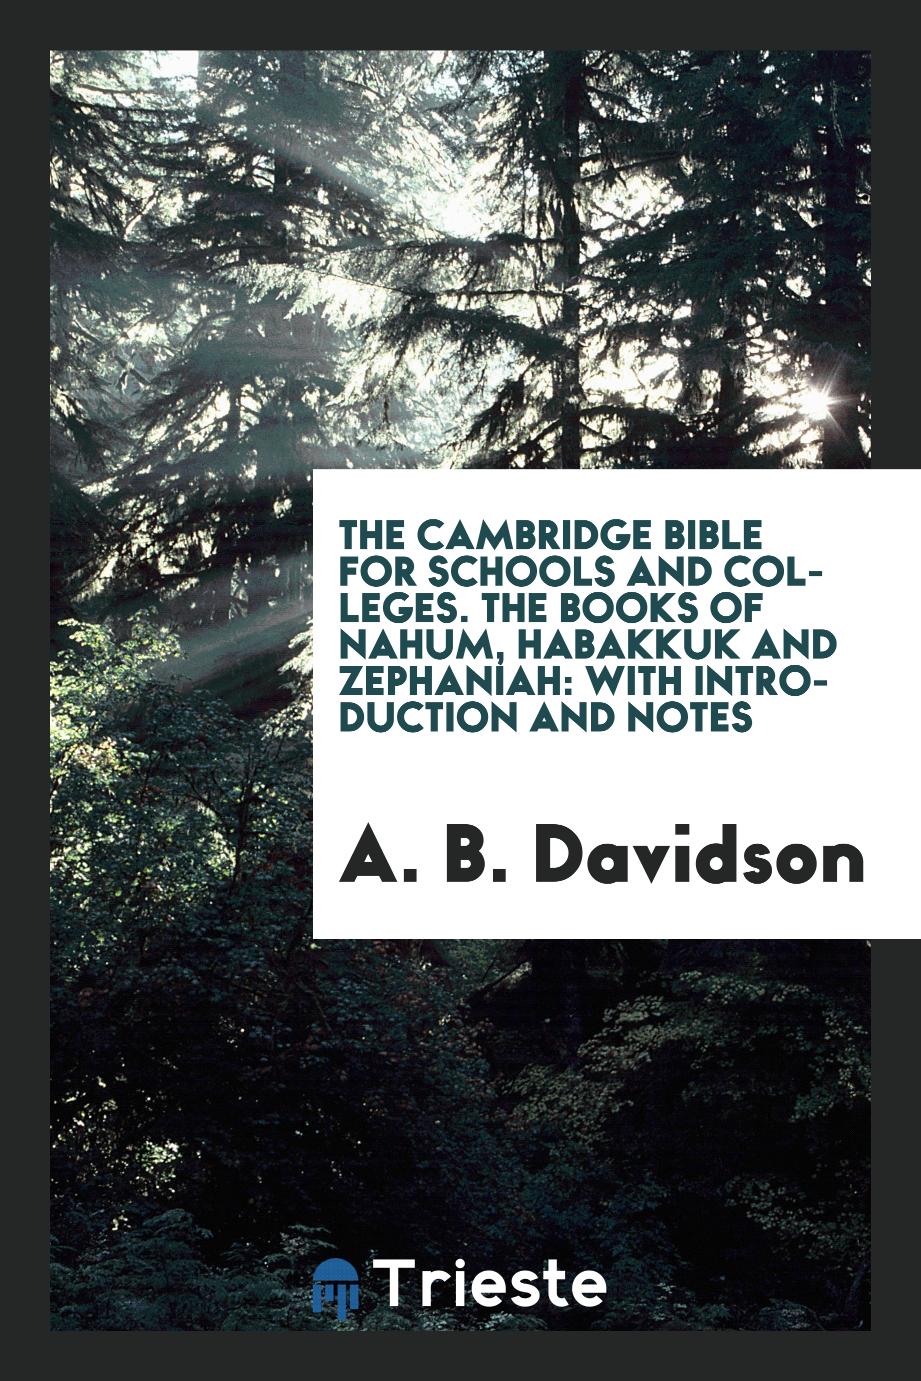 The Cambridge Bible for Schools and Colleges. The Books of Nahum, Habakkuk and Zephaniah: With Introduction and Notes